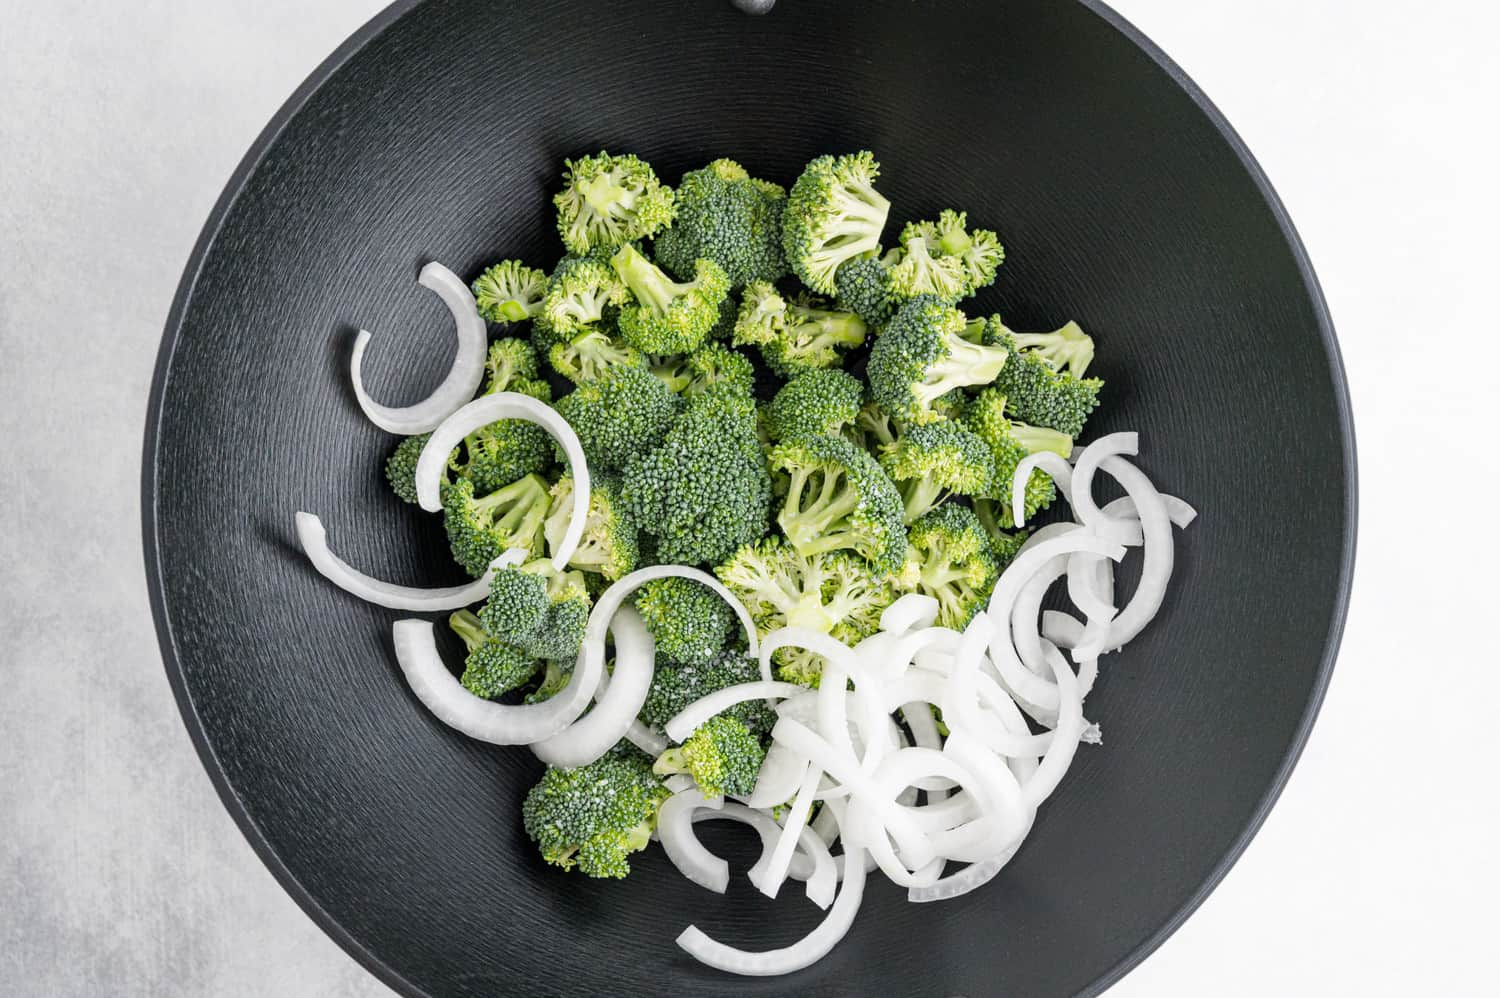 Broccoli and onion in a black wok.